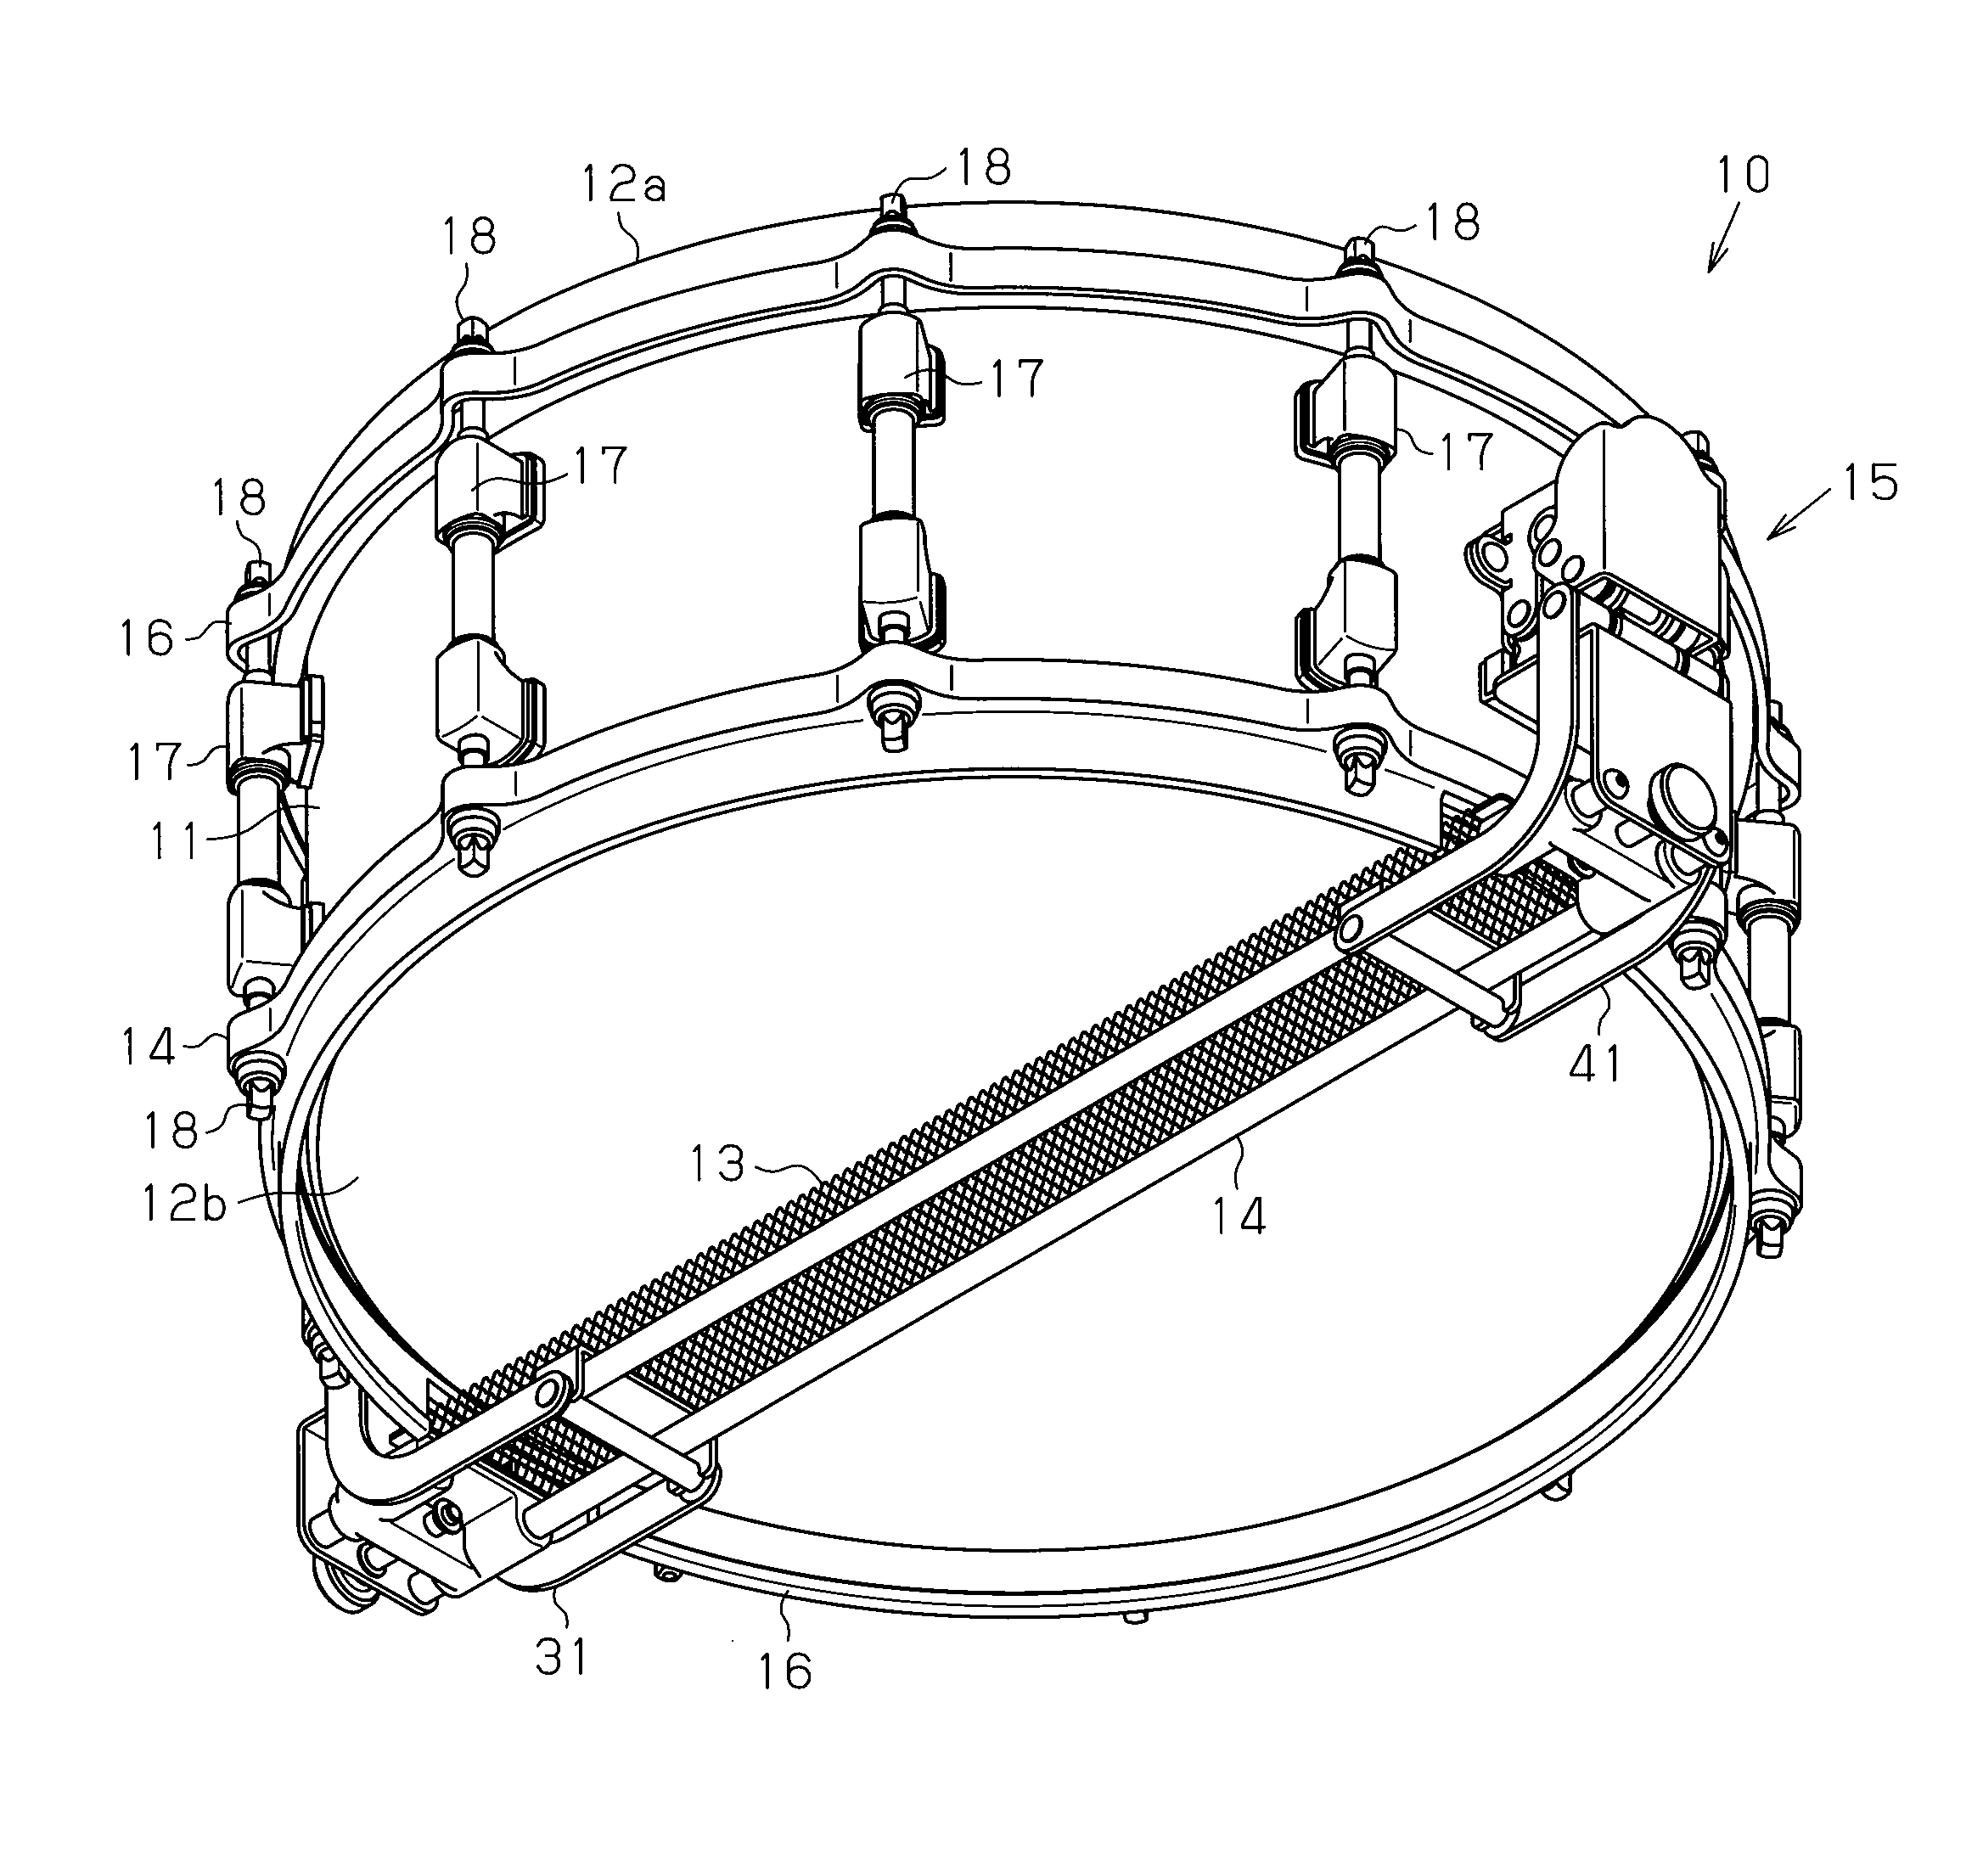 Strainer system of snare drum and snare drum with the strainer system